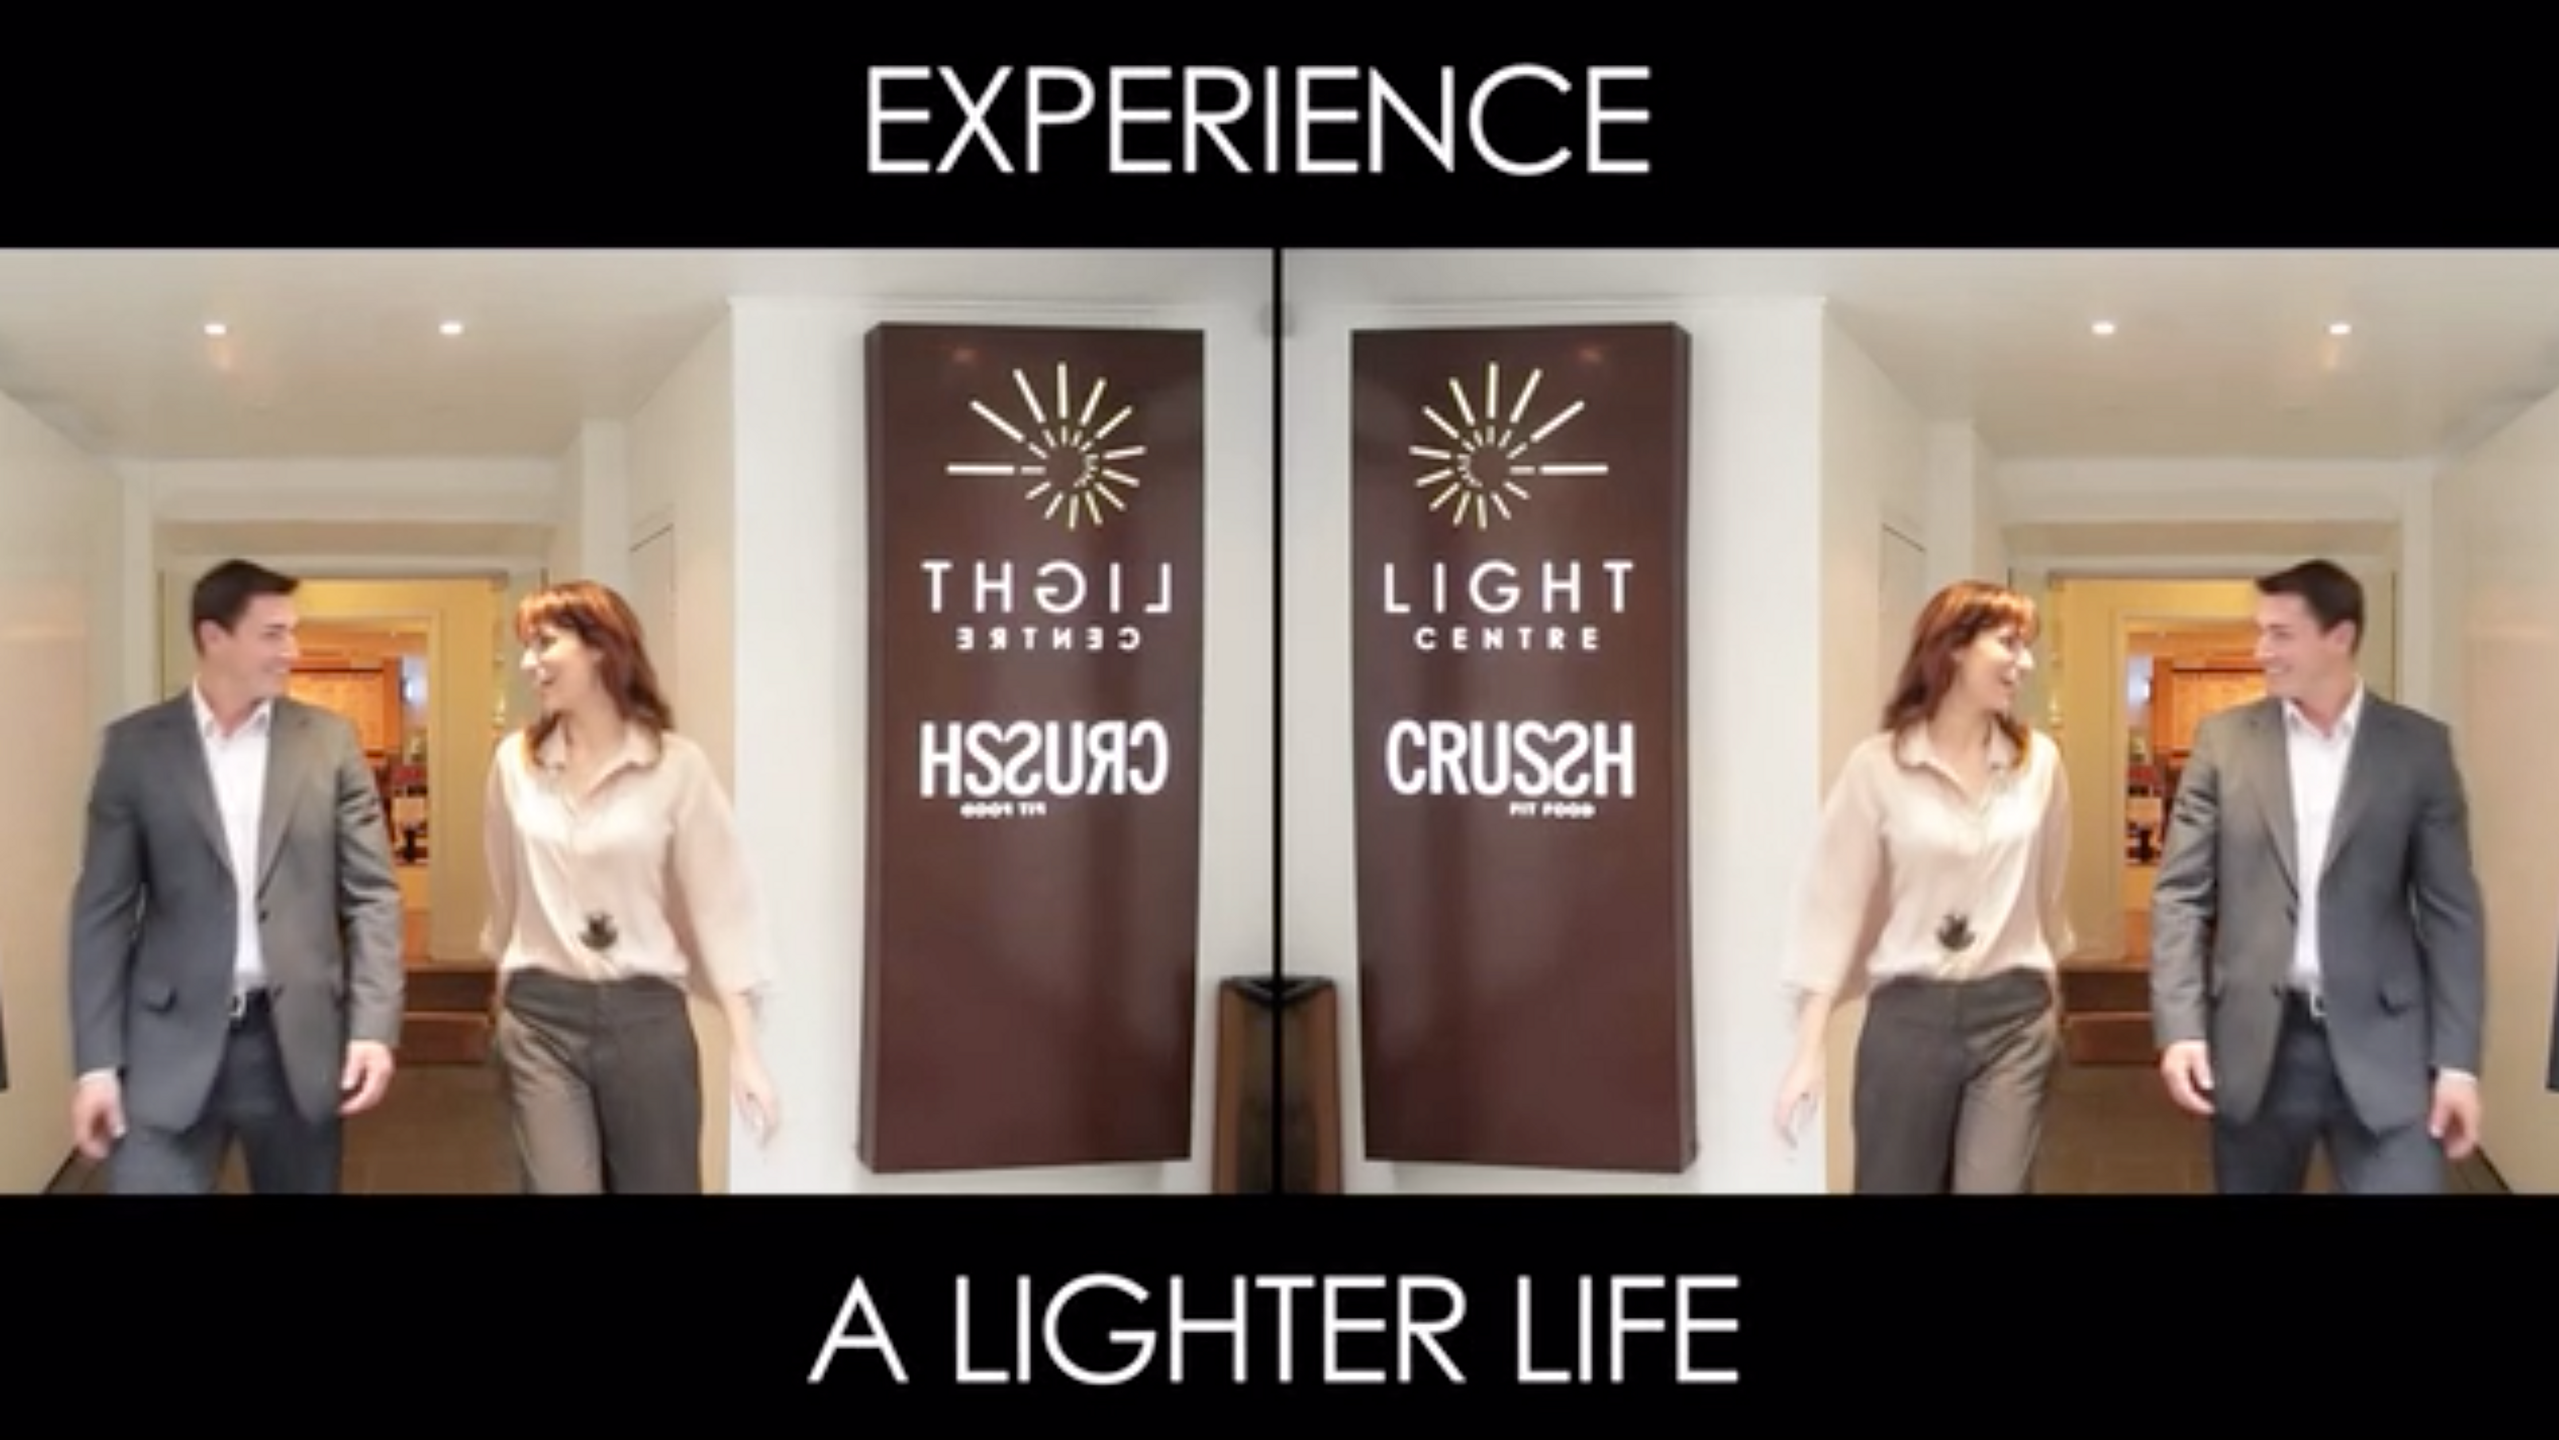 The Light Centre Experience